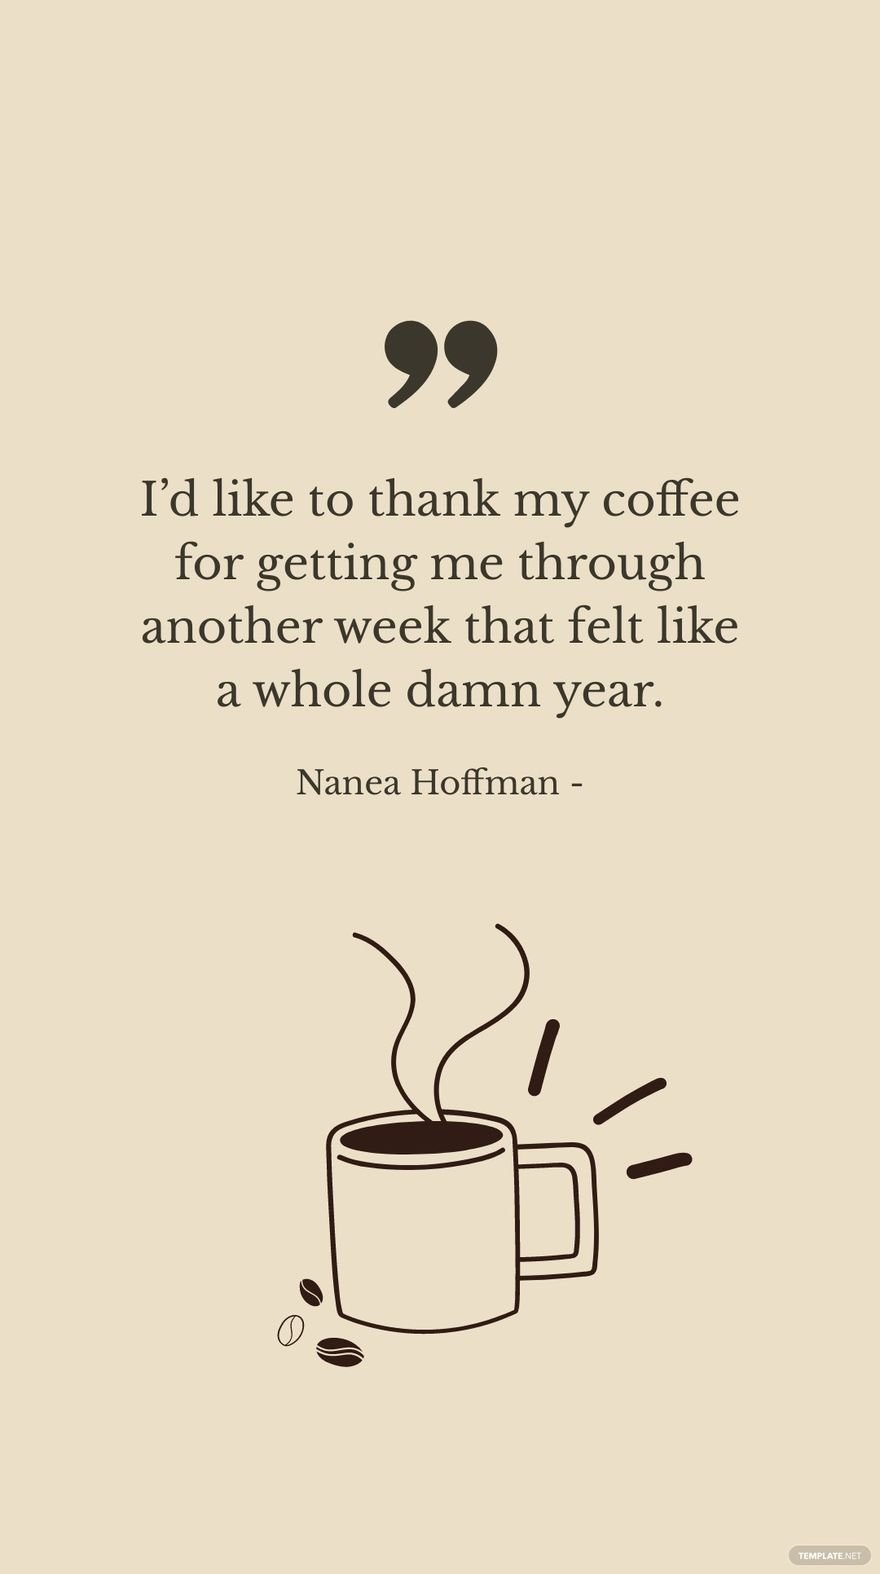 Nanea Hoffman - I’d like to thank my coffee for getting me through another week that felt like a whole damn year.